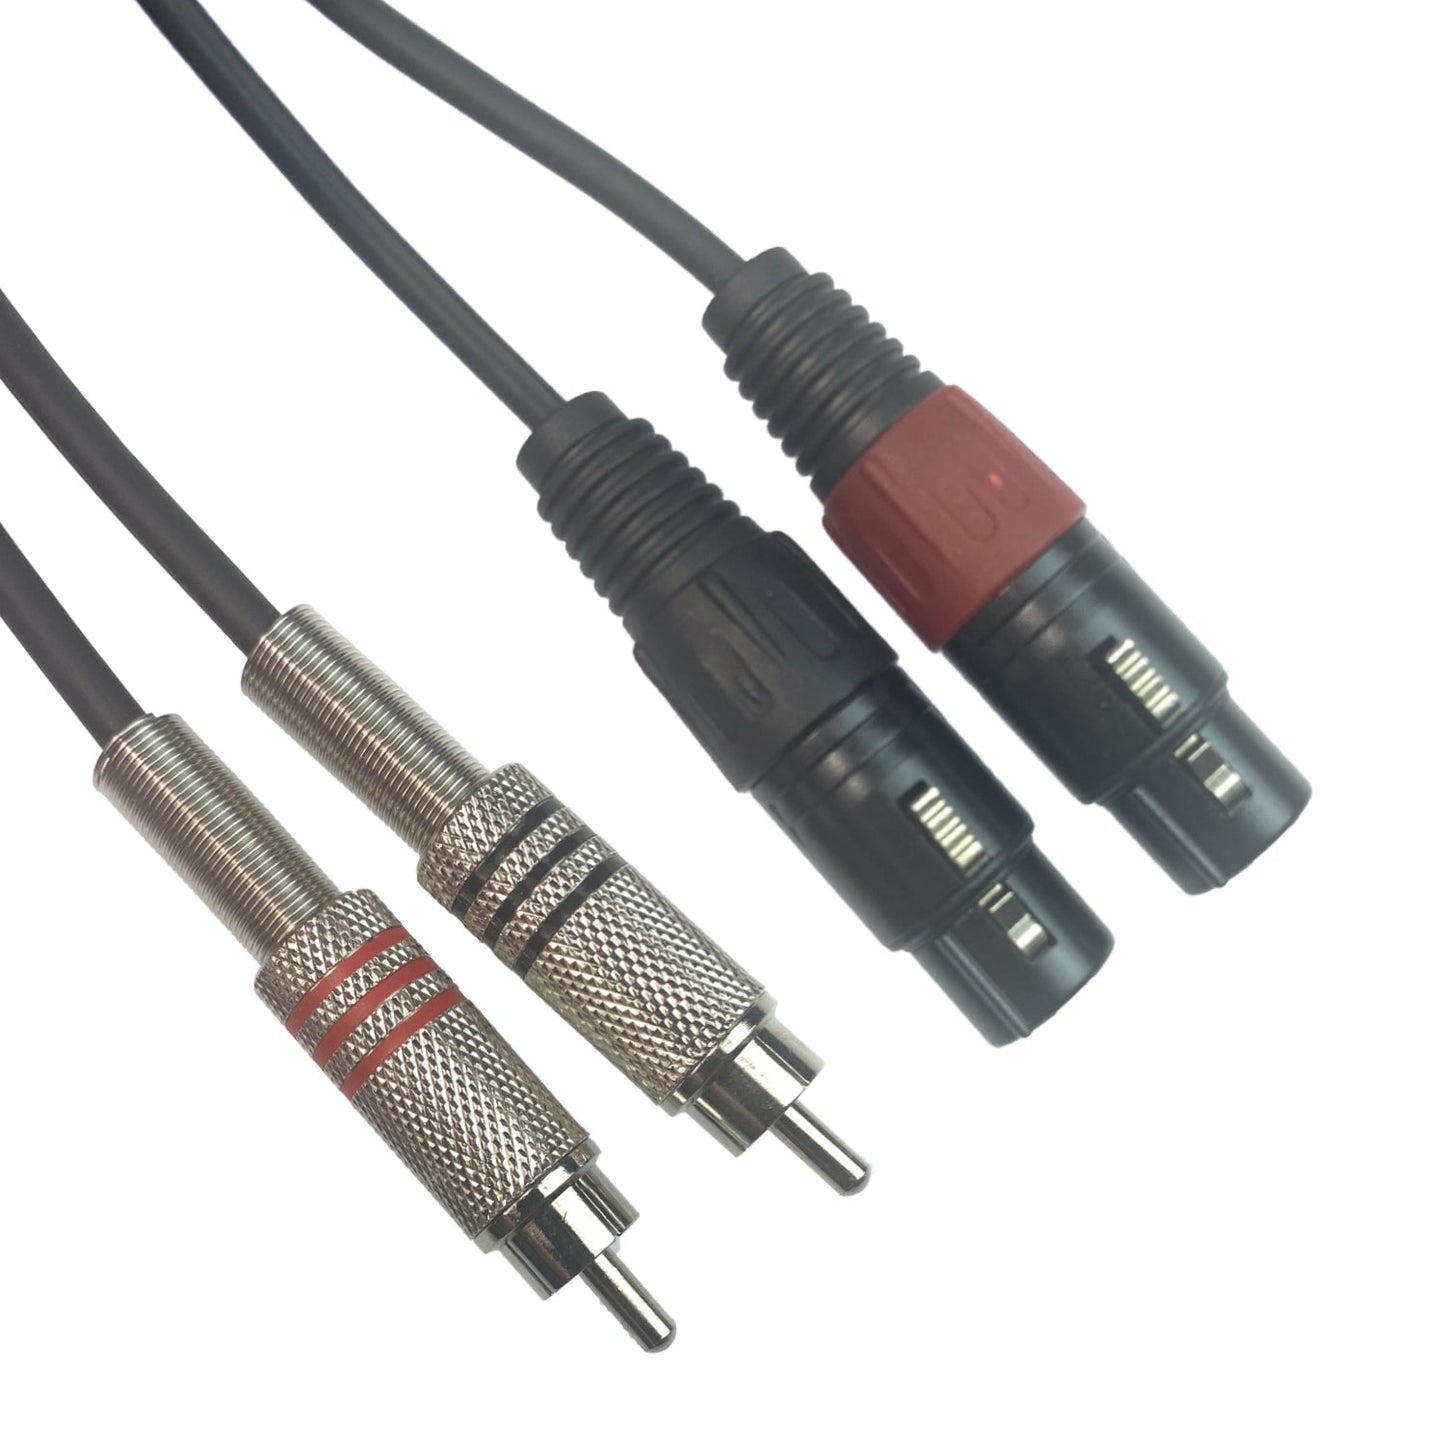 Dual XLR to RCA Cable Heavy Duty 2 XLR Female to 2 RCA Male Patch Cord HiFi Stereo Audio Connection Interconnect Lead Wire